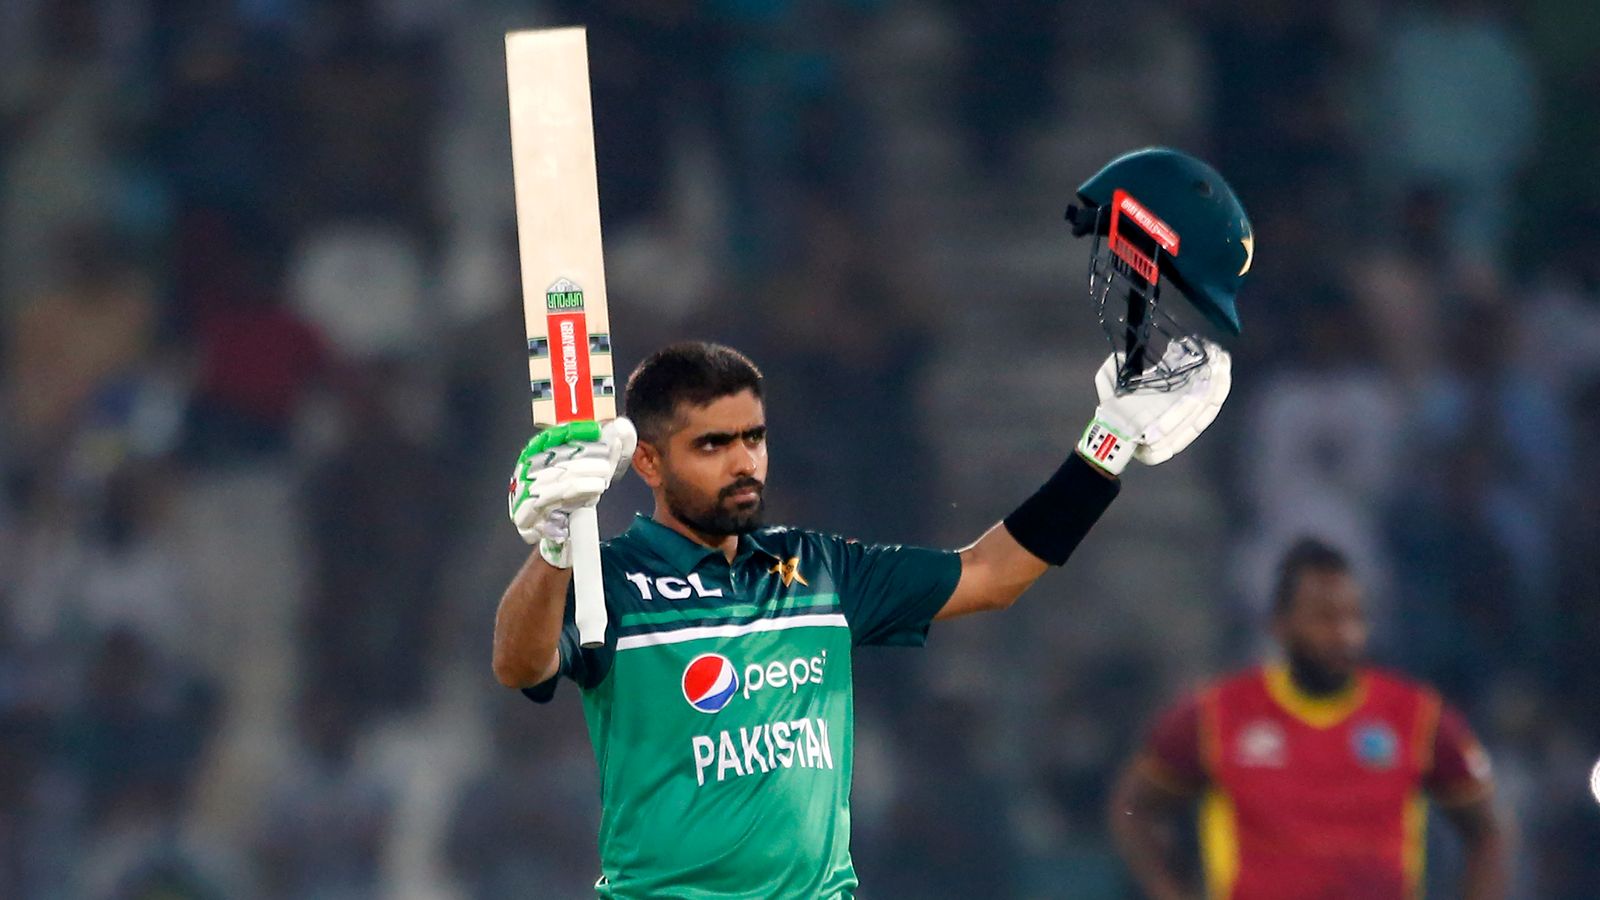 Babar Azam, the prodigious Pakistani cricketer, has carved his name in the annals of the sport with his extraordinary talent and consistency.